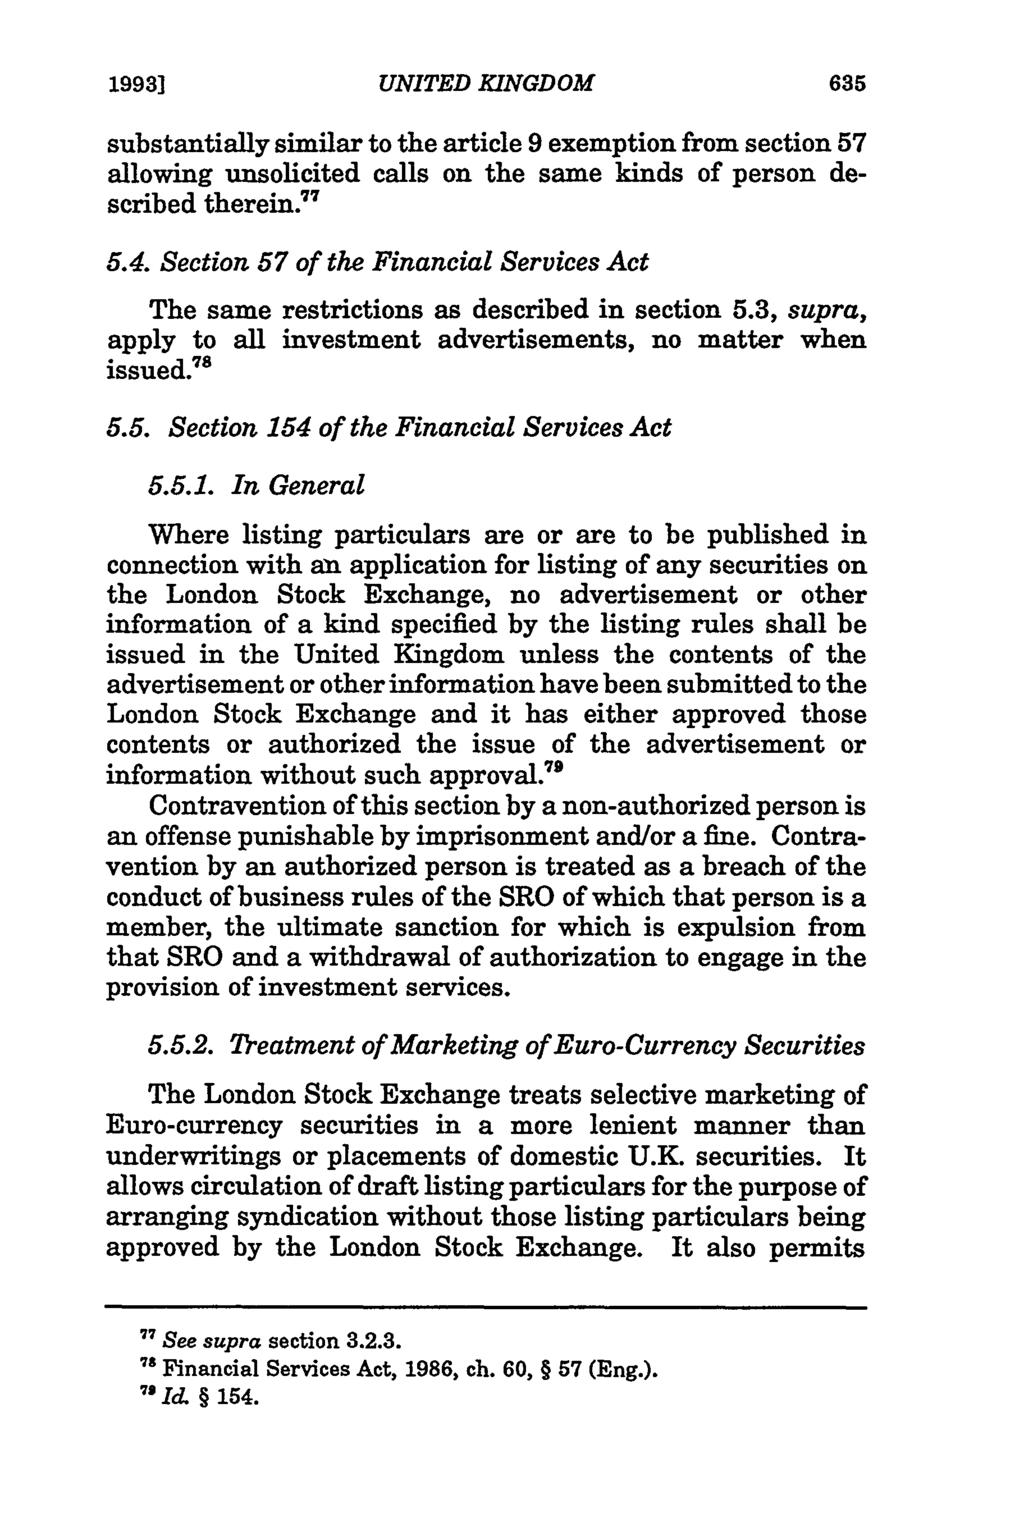 1993] substantially similar to the article 9 exemption from section 57 allowing unsolicited calls on the same kinds of person described therein. 7 5.4.